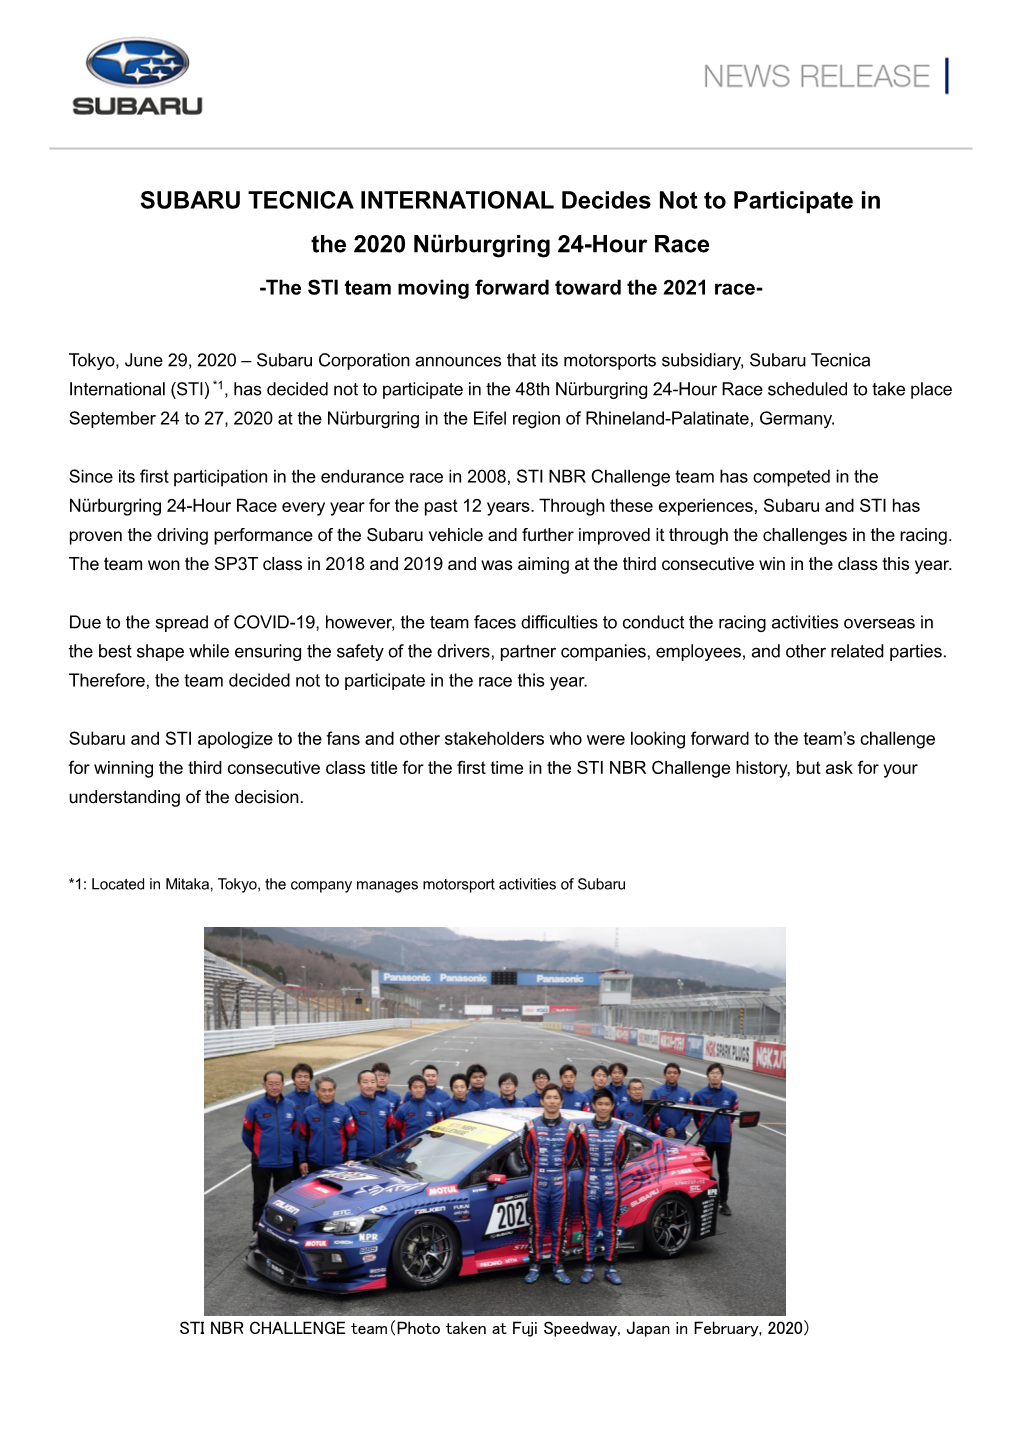 SUBARU TECNICA INTERNATIONAL Decides Not to Participate in the 2020 Nürburgring 24-Hour Race -The STI Team Moving Forward Toward the 2021 Race